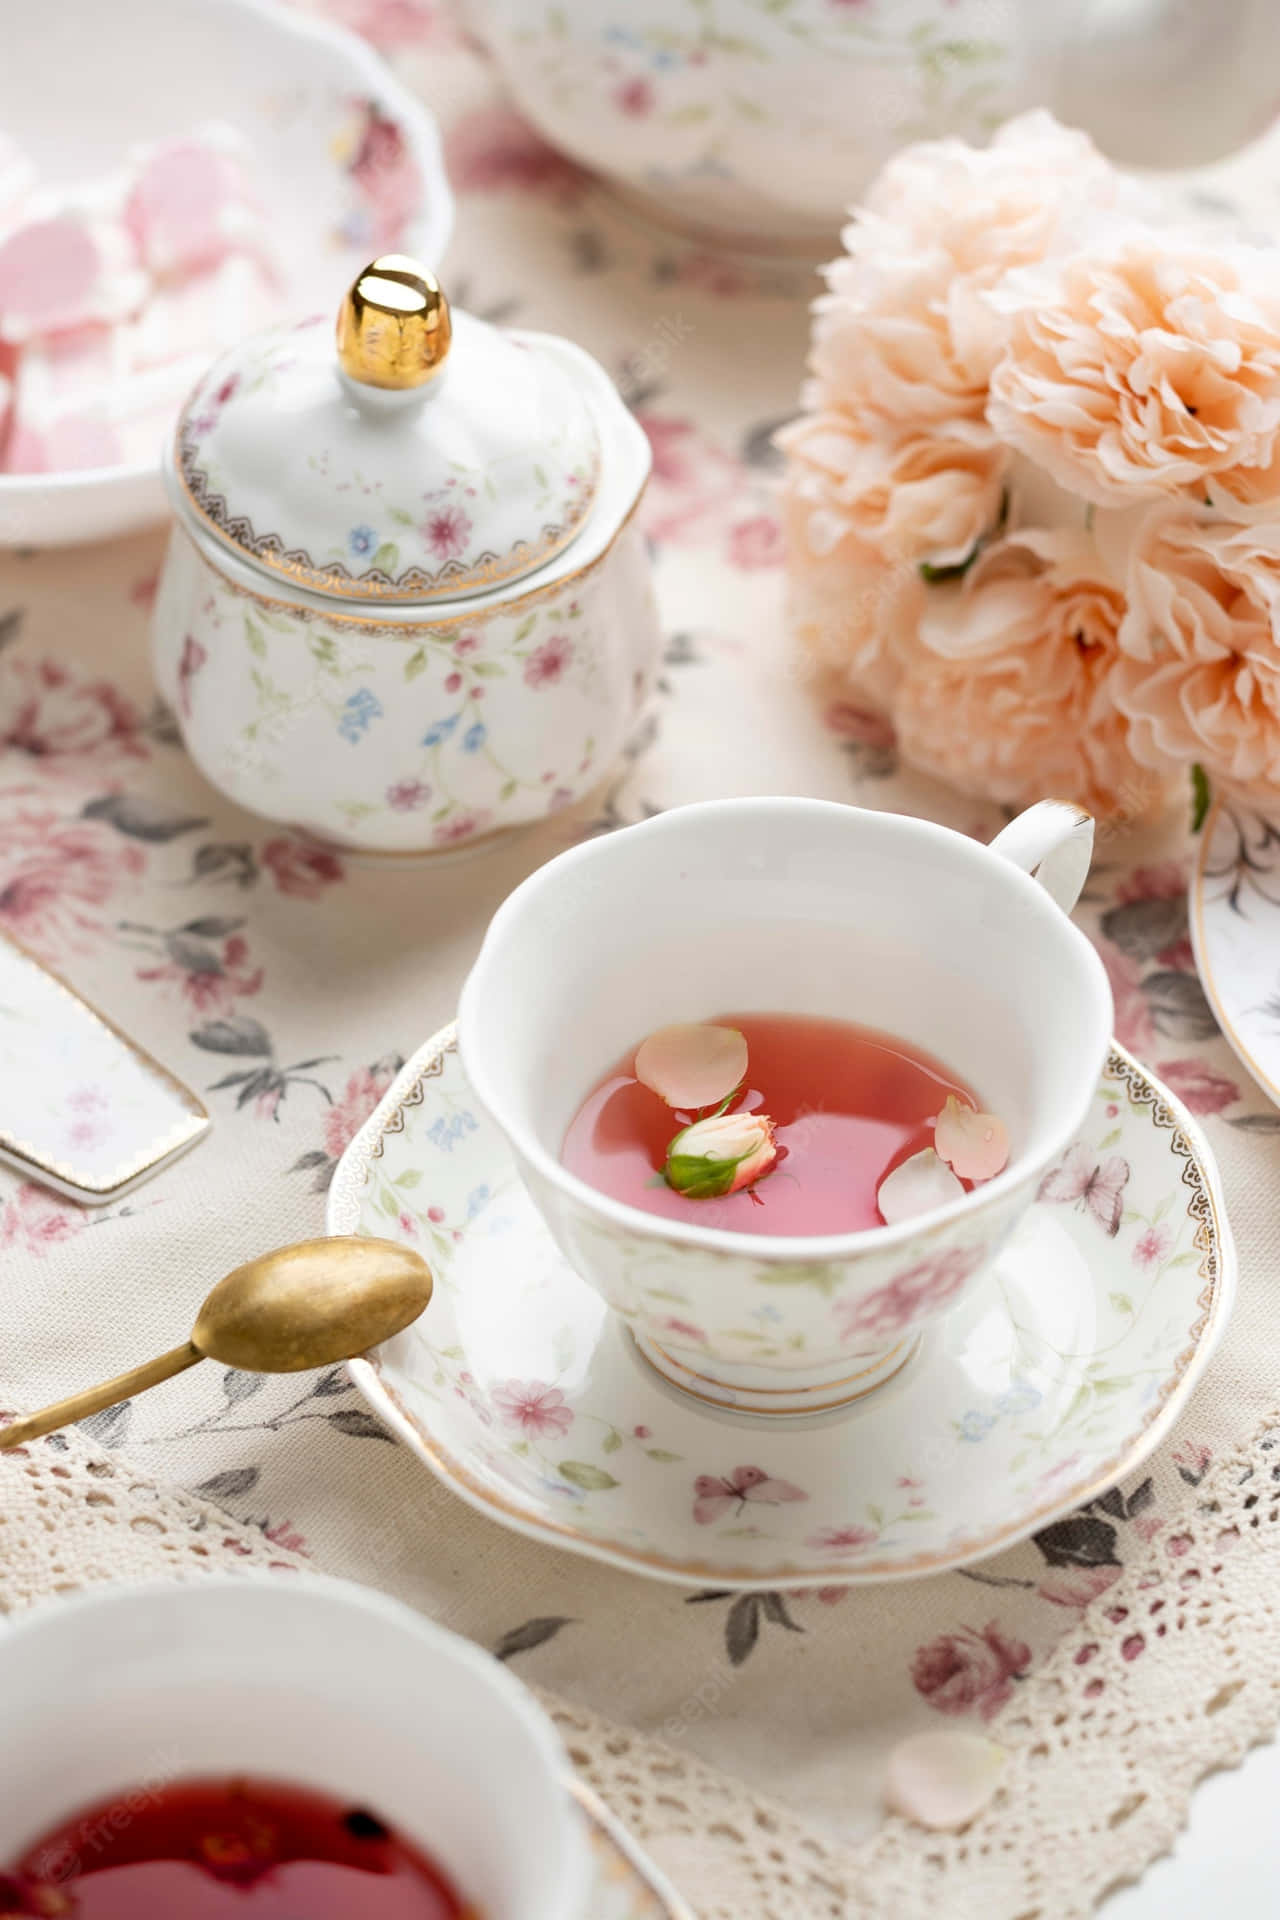 Celebrate with a Tea Party